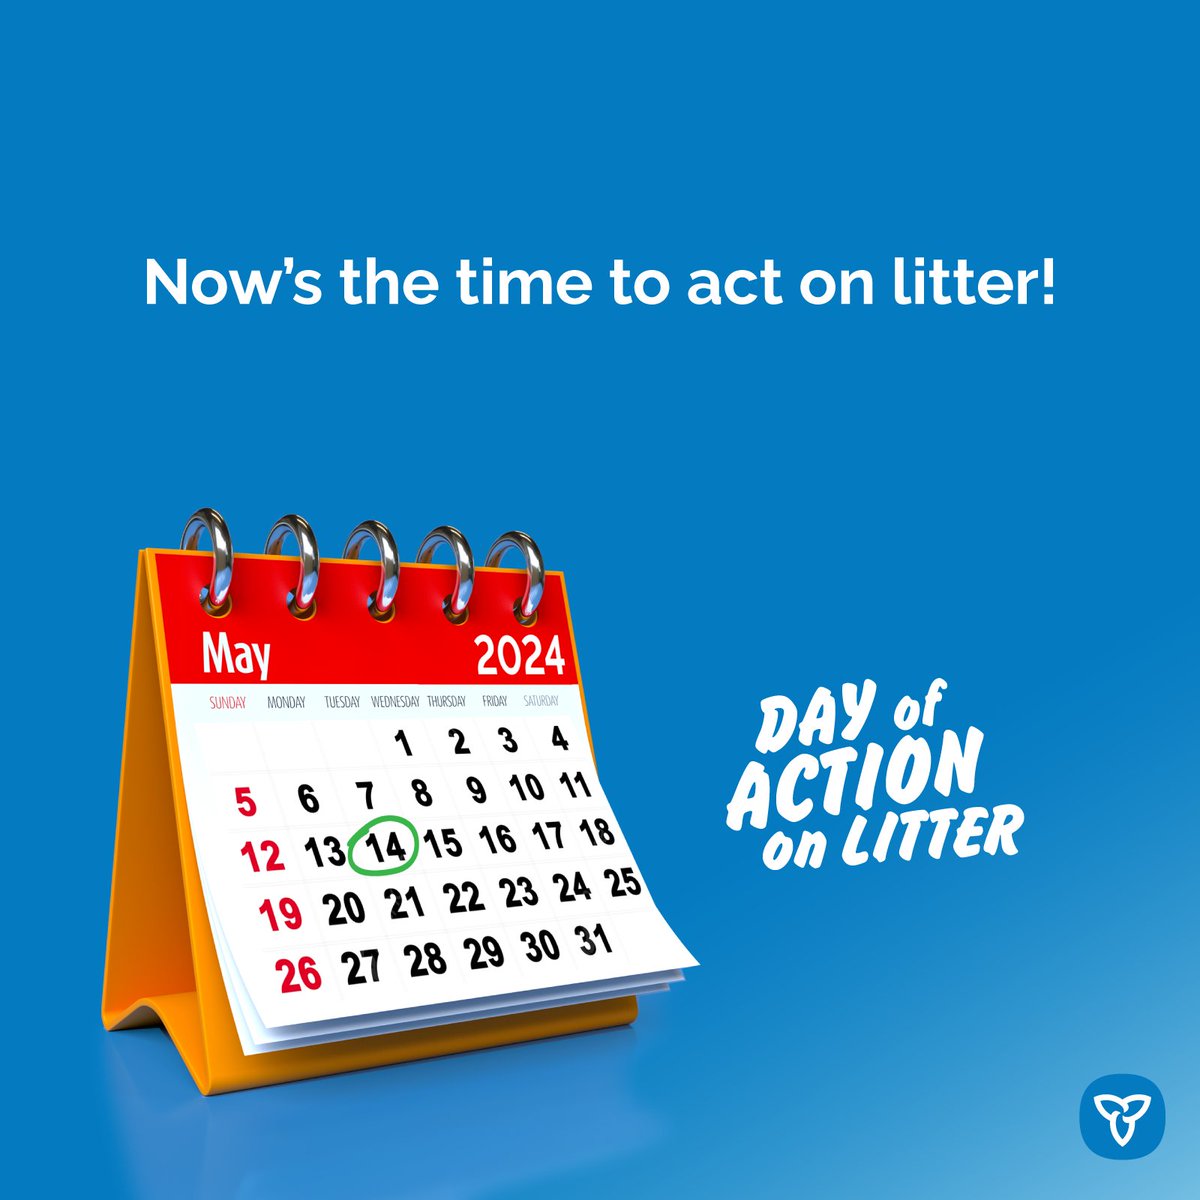 Mark the day in your calendars - May 14th is Ontario's Day of Action on Litter! Learn more about the day and how you can act on litter in your community here: ontario.ca/page/act-on-li…